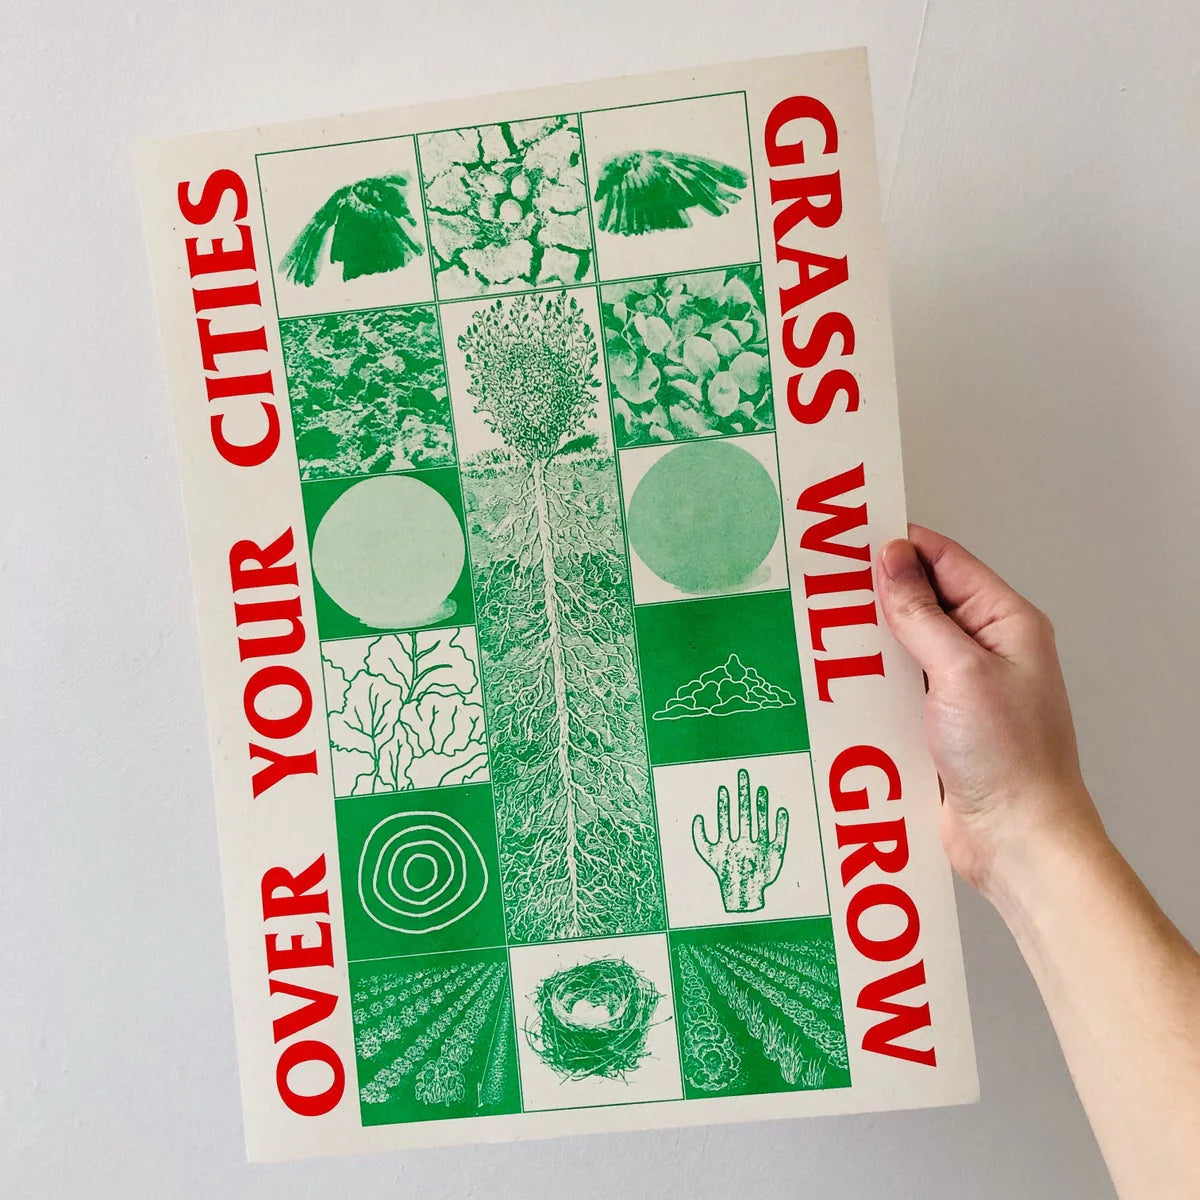 Black Lodge Press Over Your Cities Grass Will Grow A3 Framed Riso Print